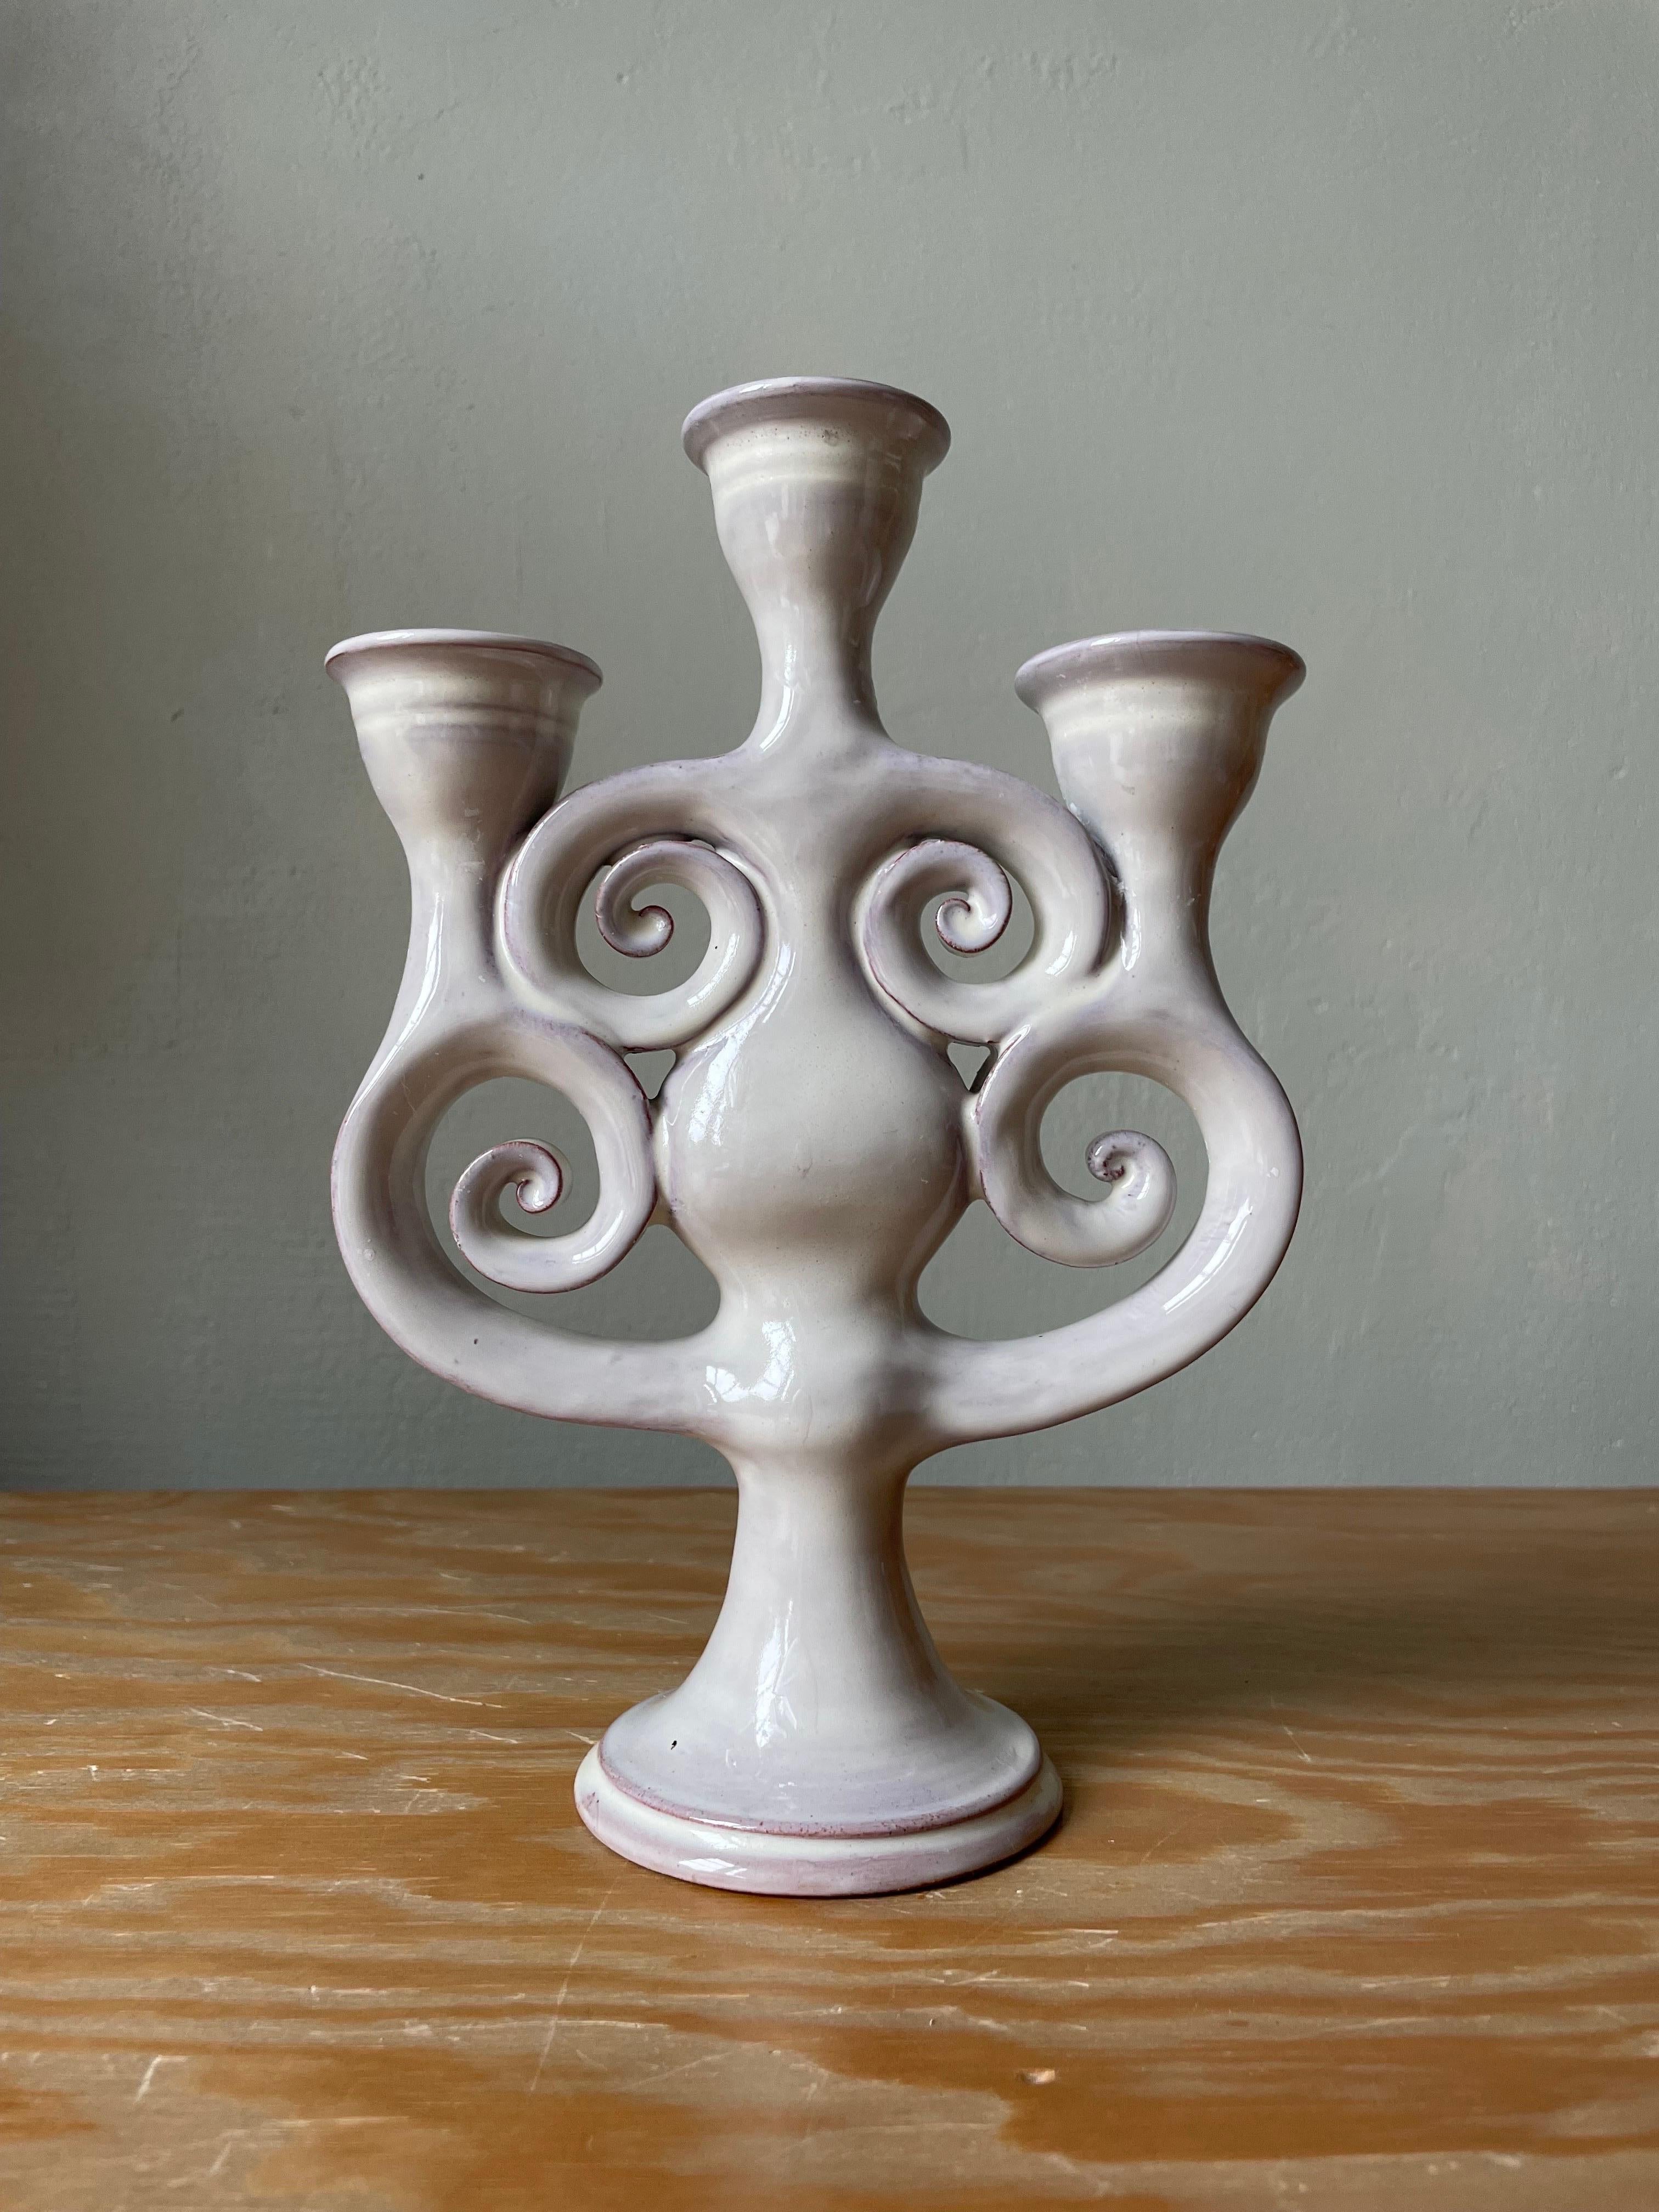 Handmade ceramic three arm candelabra with shiny greyish white glaze. Soft organic modern shapes with swirling decor. Small crackles in glaze. Handmade in Denmark in the 1970s. Beautiful vintage condition. 
Denmark, 1970s.